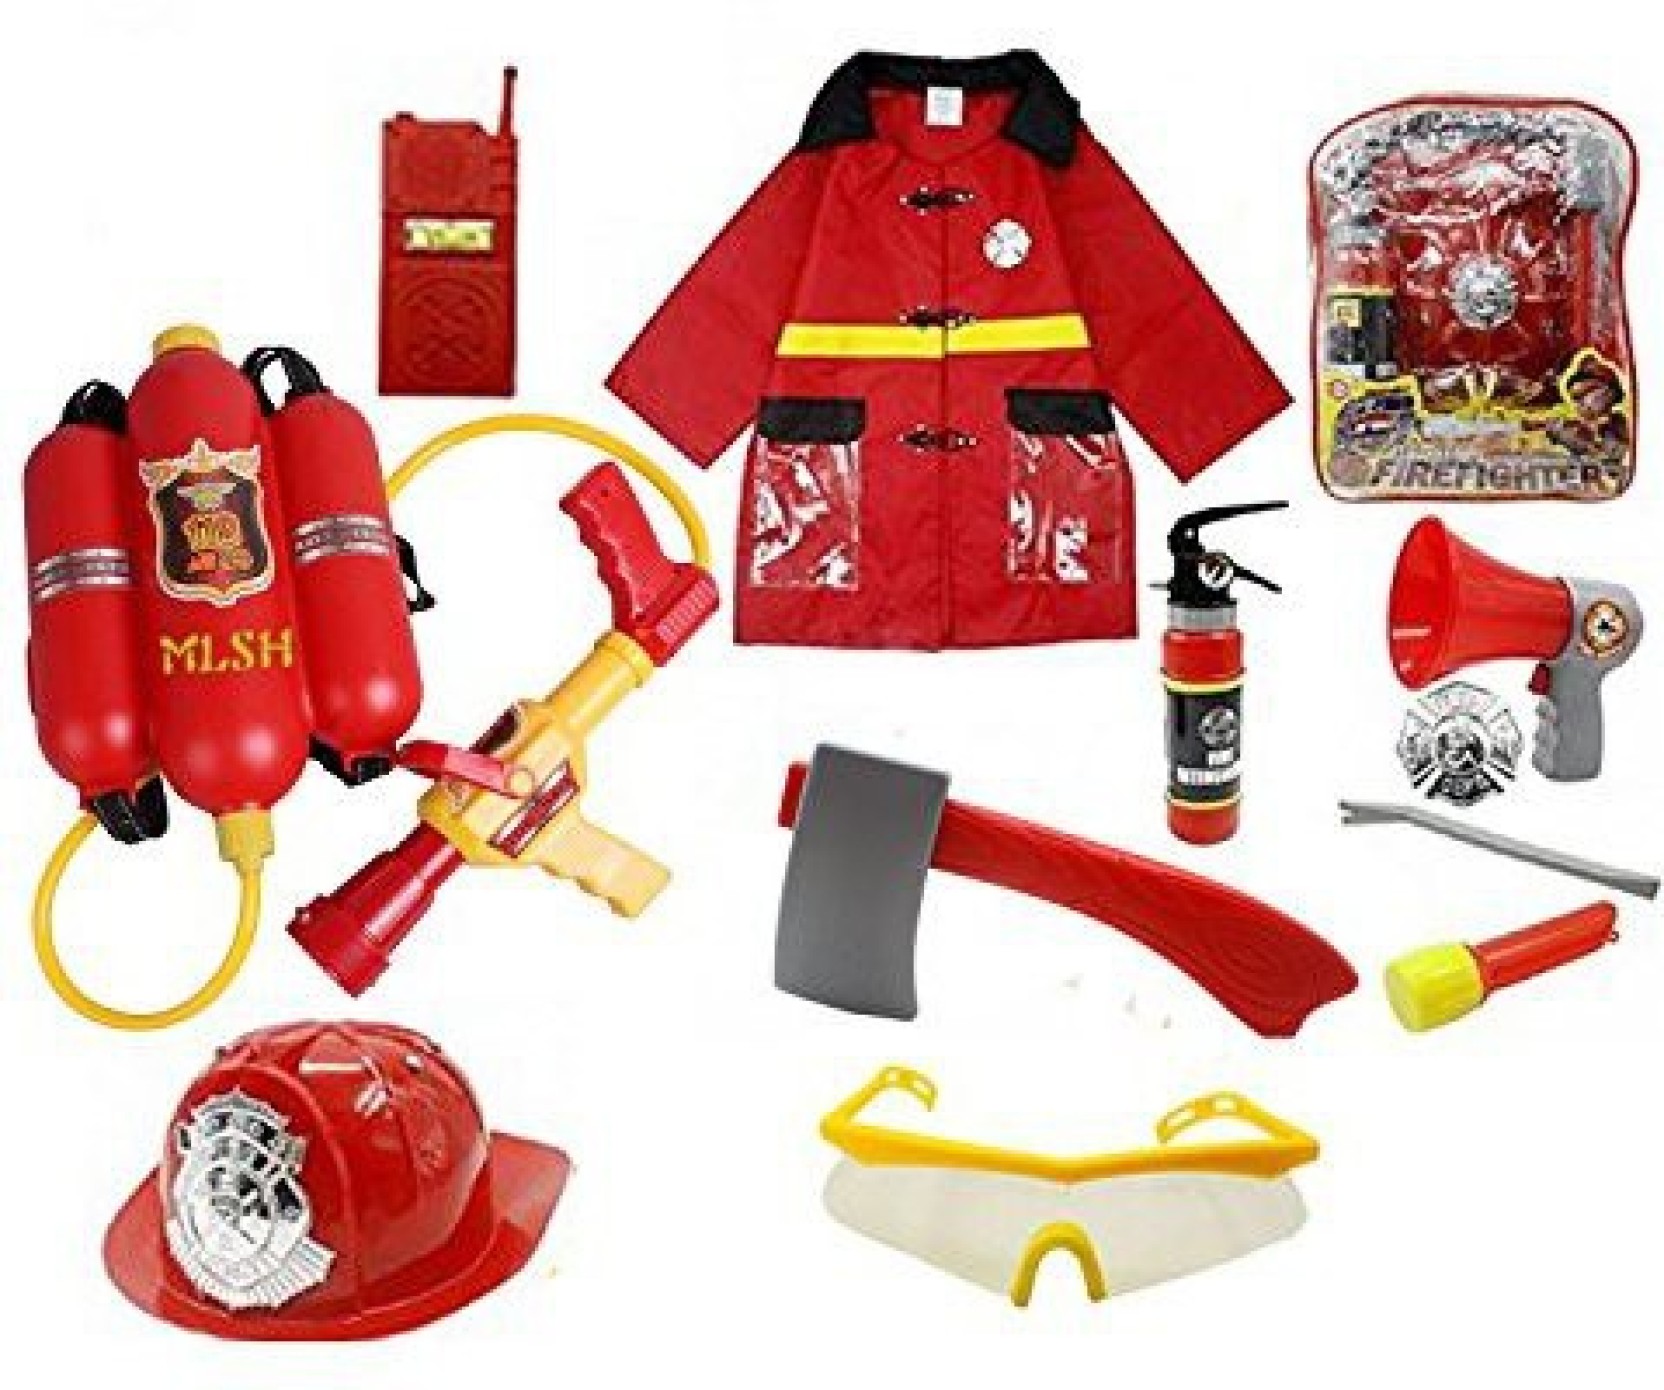 Generic 11pcs Fireman Gear Firefighter Costume Role Play Toy Set